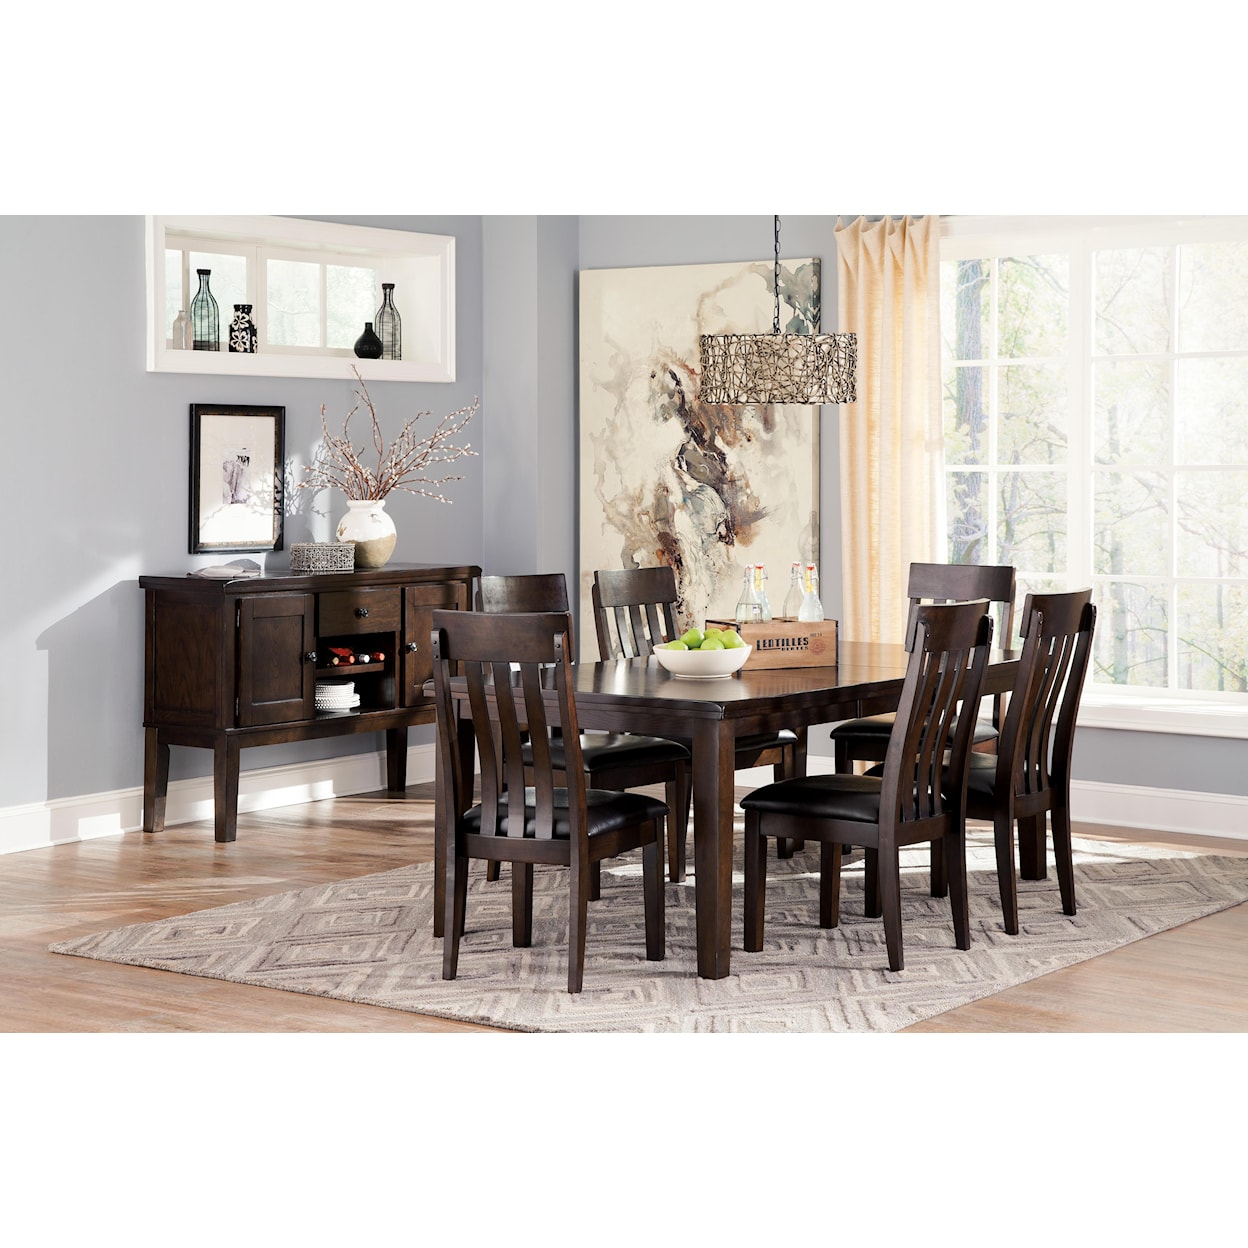 Ashley Furniture Signature Design Haddigan 7-Piece Dining Room Table & Side Chair Set